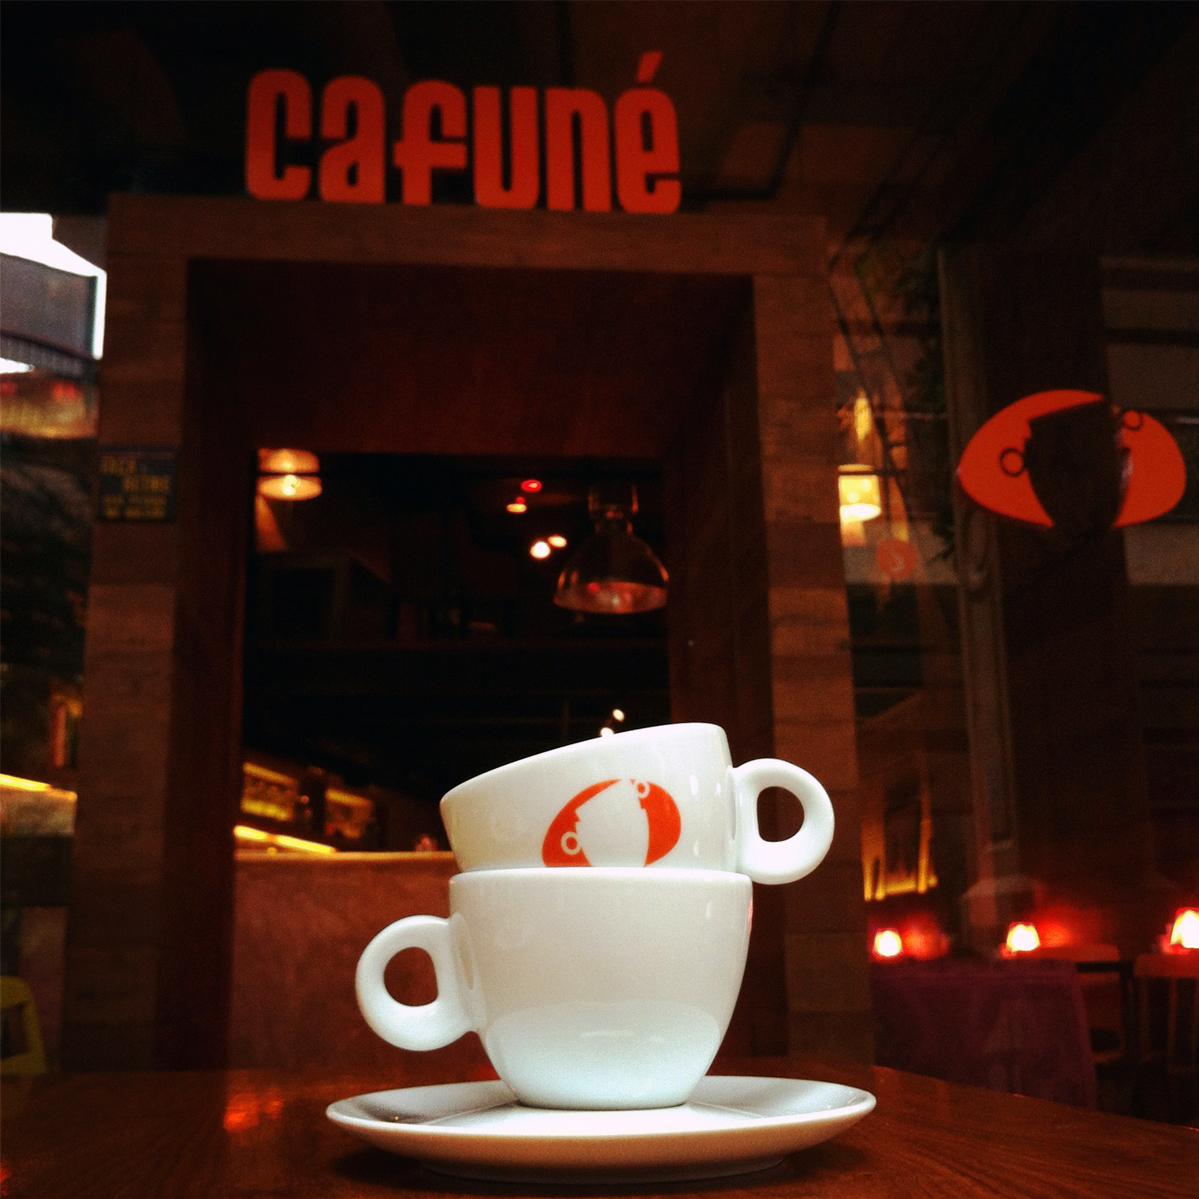 Cover image of this place Cafuné Cafeteria